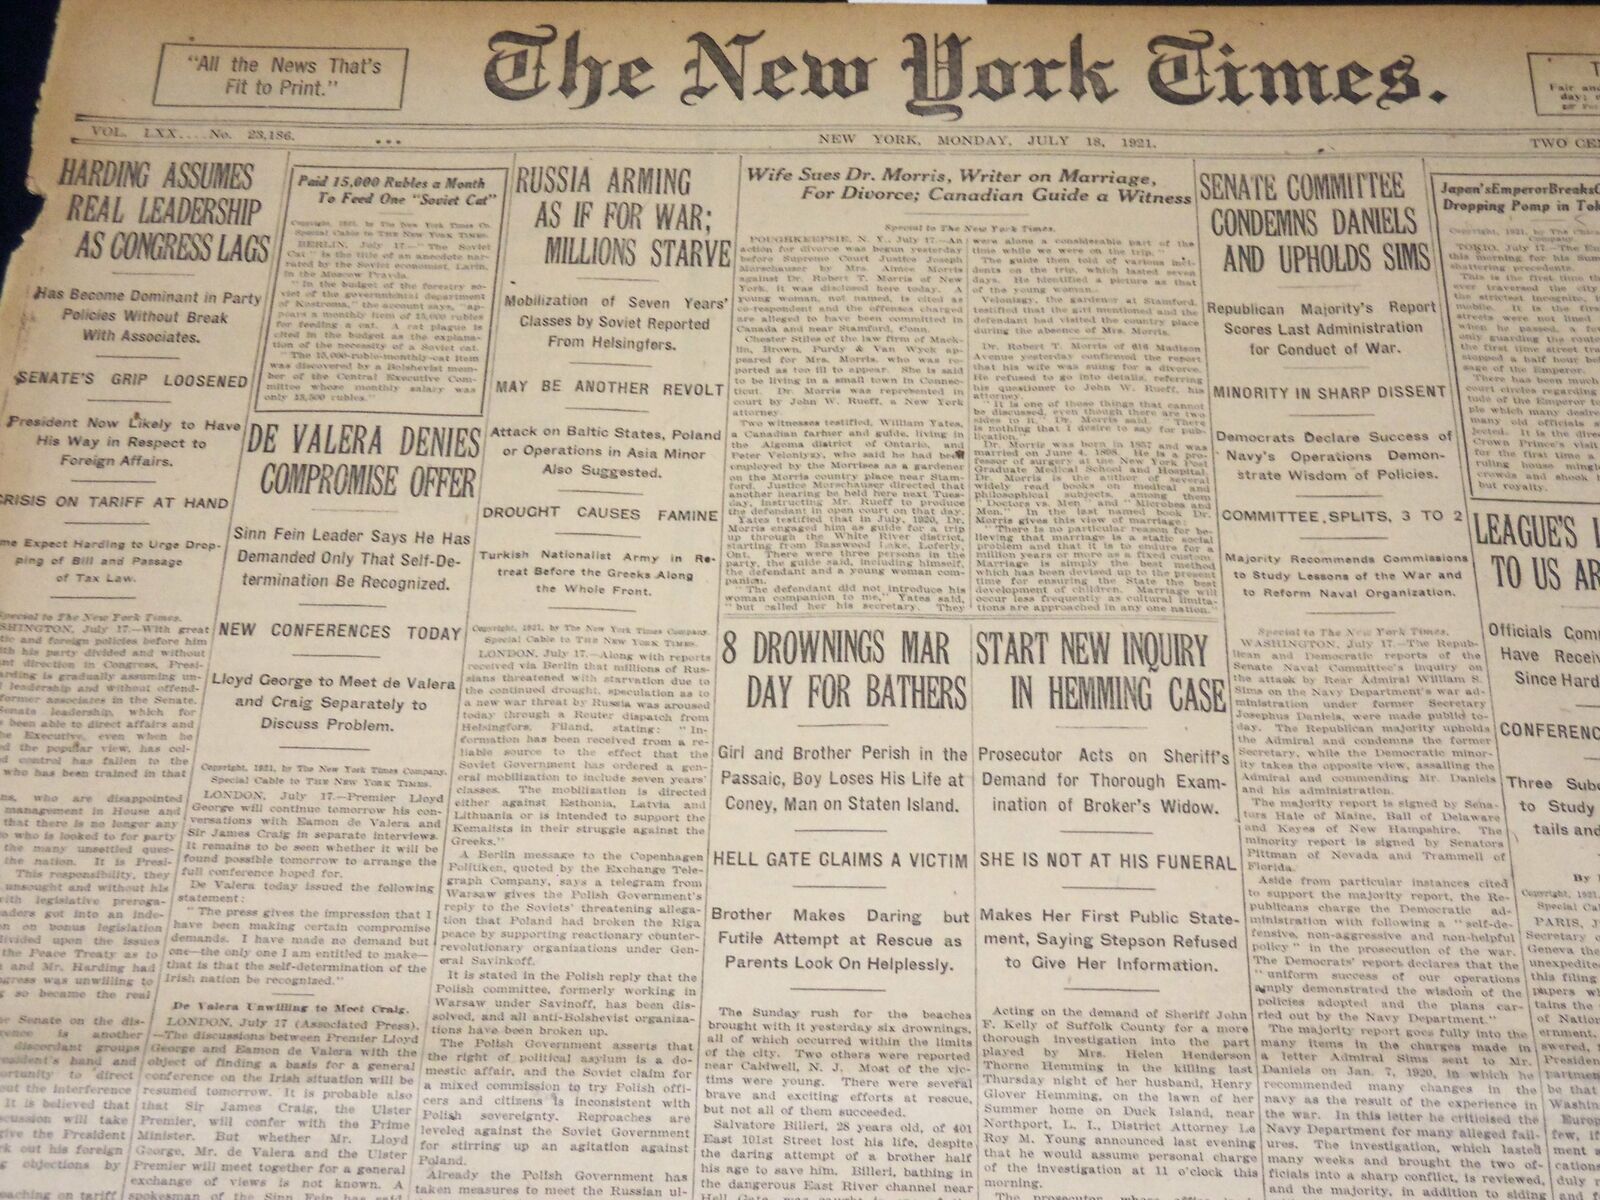 1921 JULY 18 NEW YORK TIMES - RUSSIA ARMING AS IF FOR WAR - NT 8716